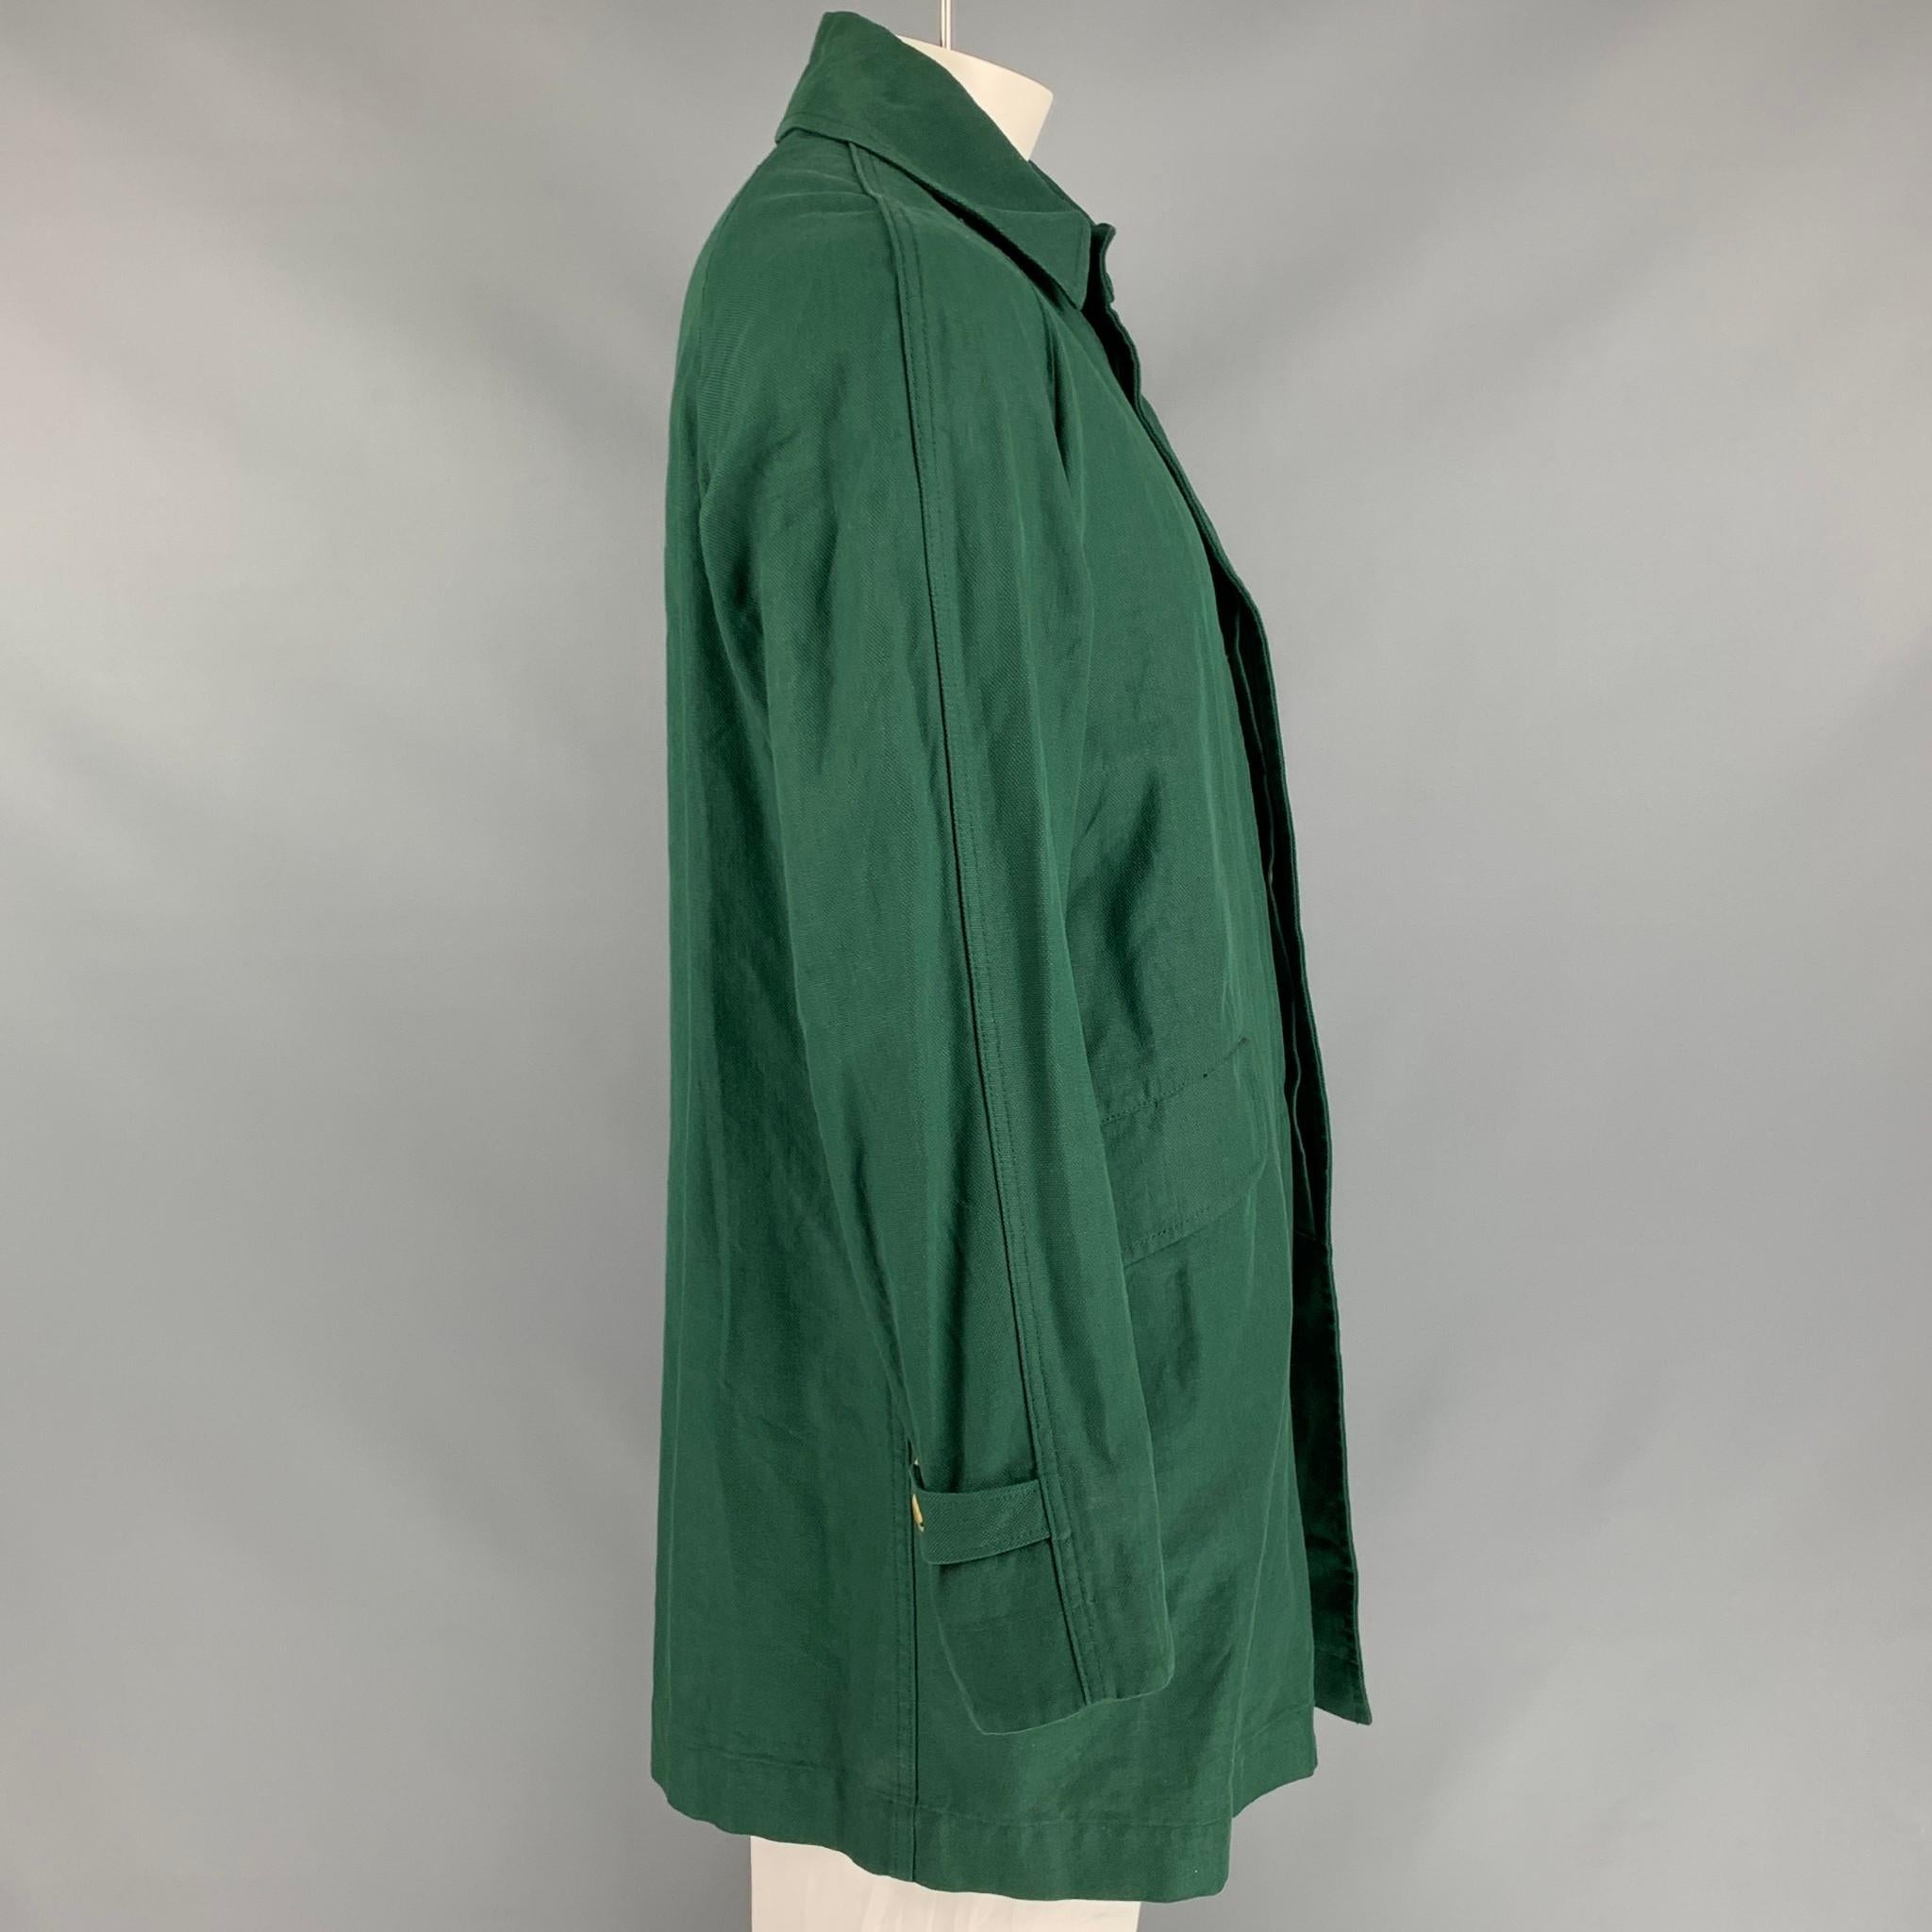 45rpm coat comes in a green cotton featuring a spread collar, buttoned sleeves, flap pockets, loose fit, and a hidden placket closure. Made in Japan. 

New With Tags. 
Marked: 3
Original Retail Price: $832.00

Measurements:

Shoulder: 16 in.
Chest: